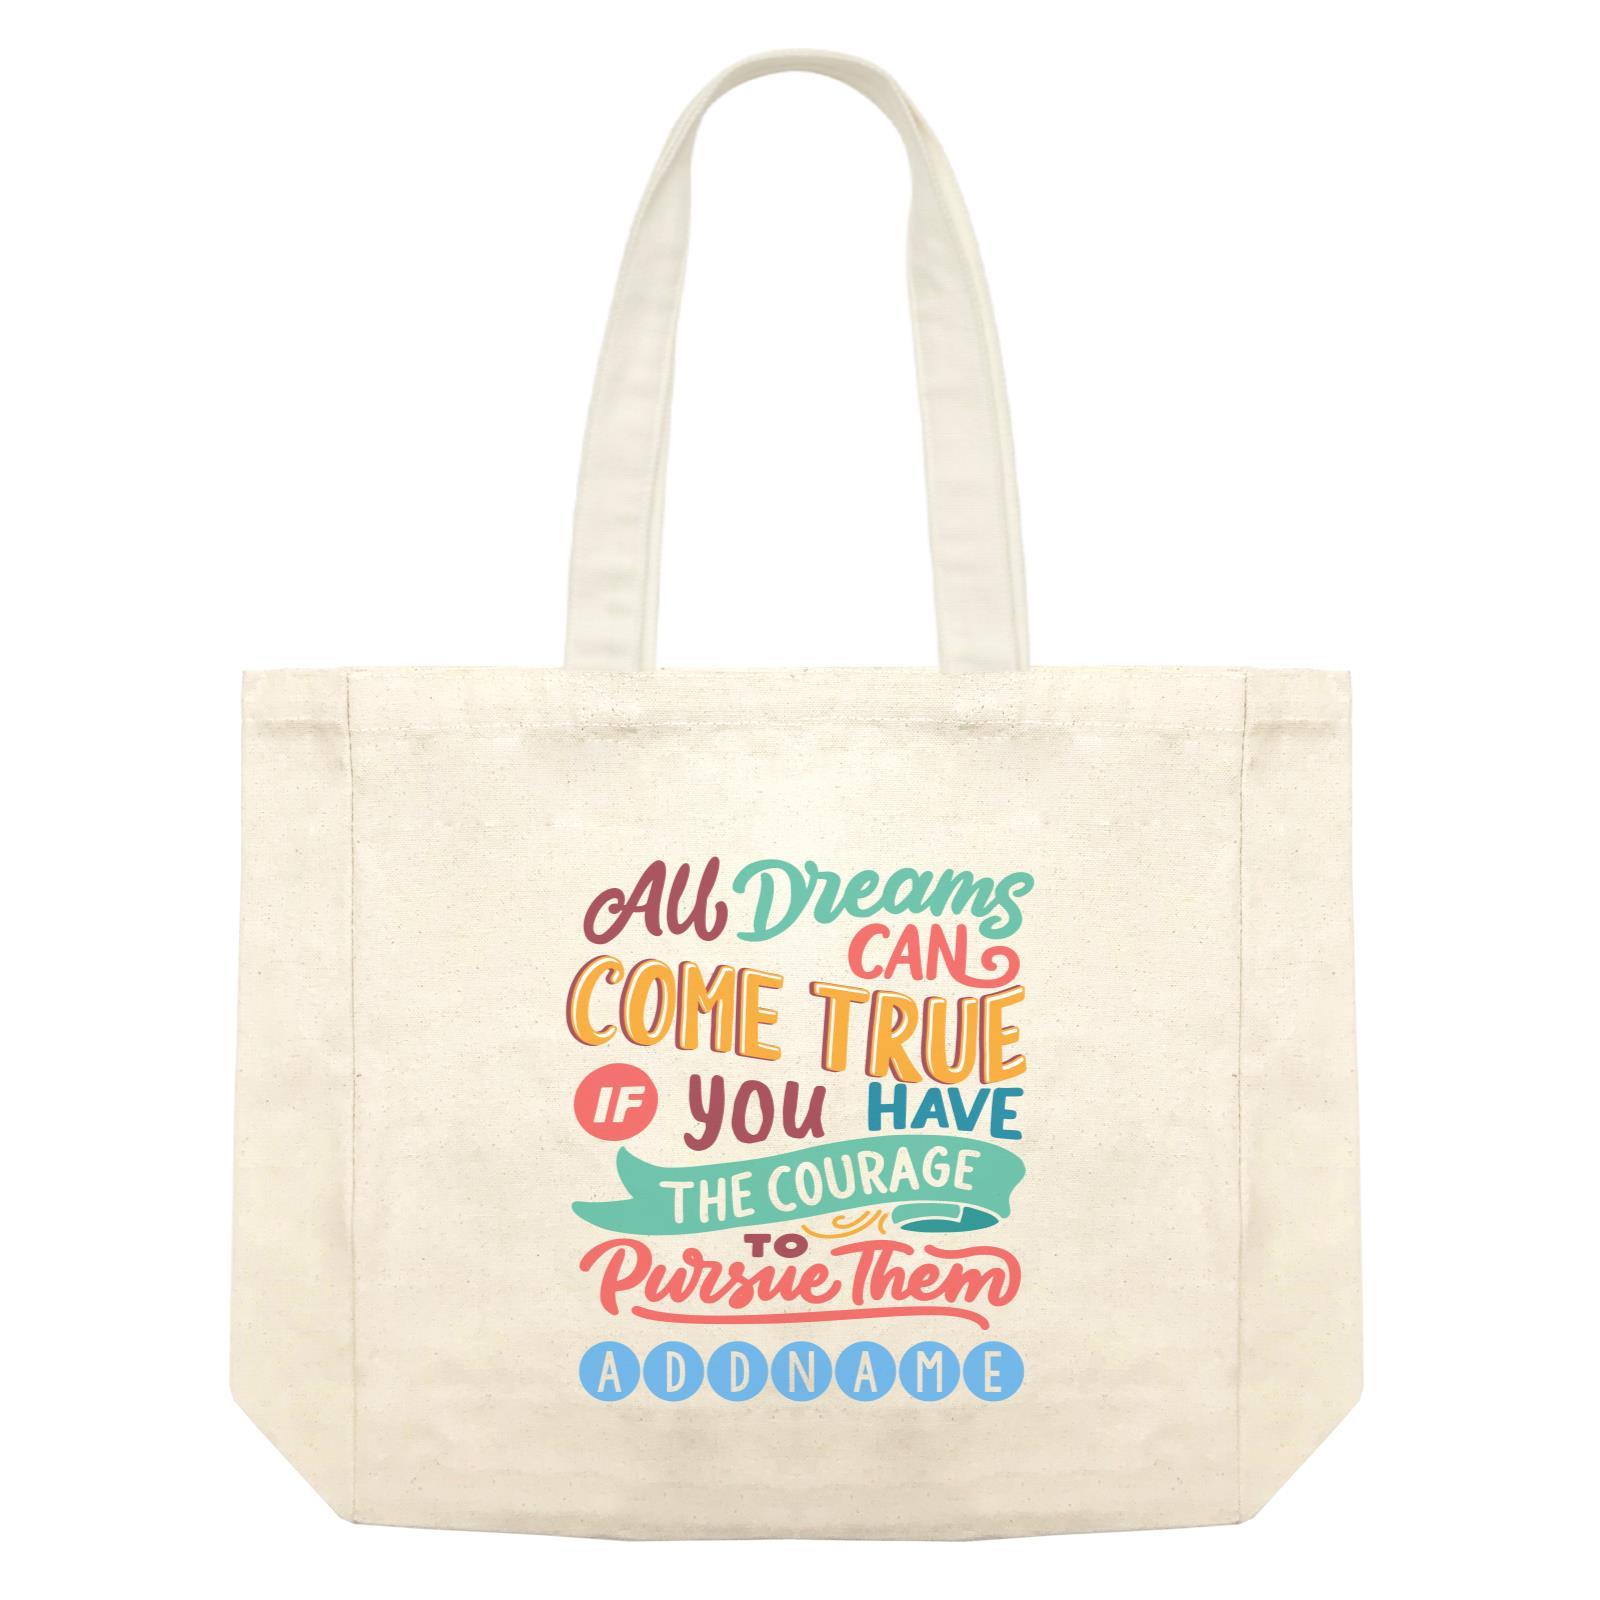 Children's Day Gift Series All Dreams Can Come True Addname Shopping Bag